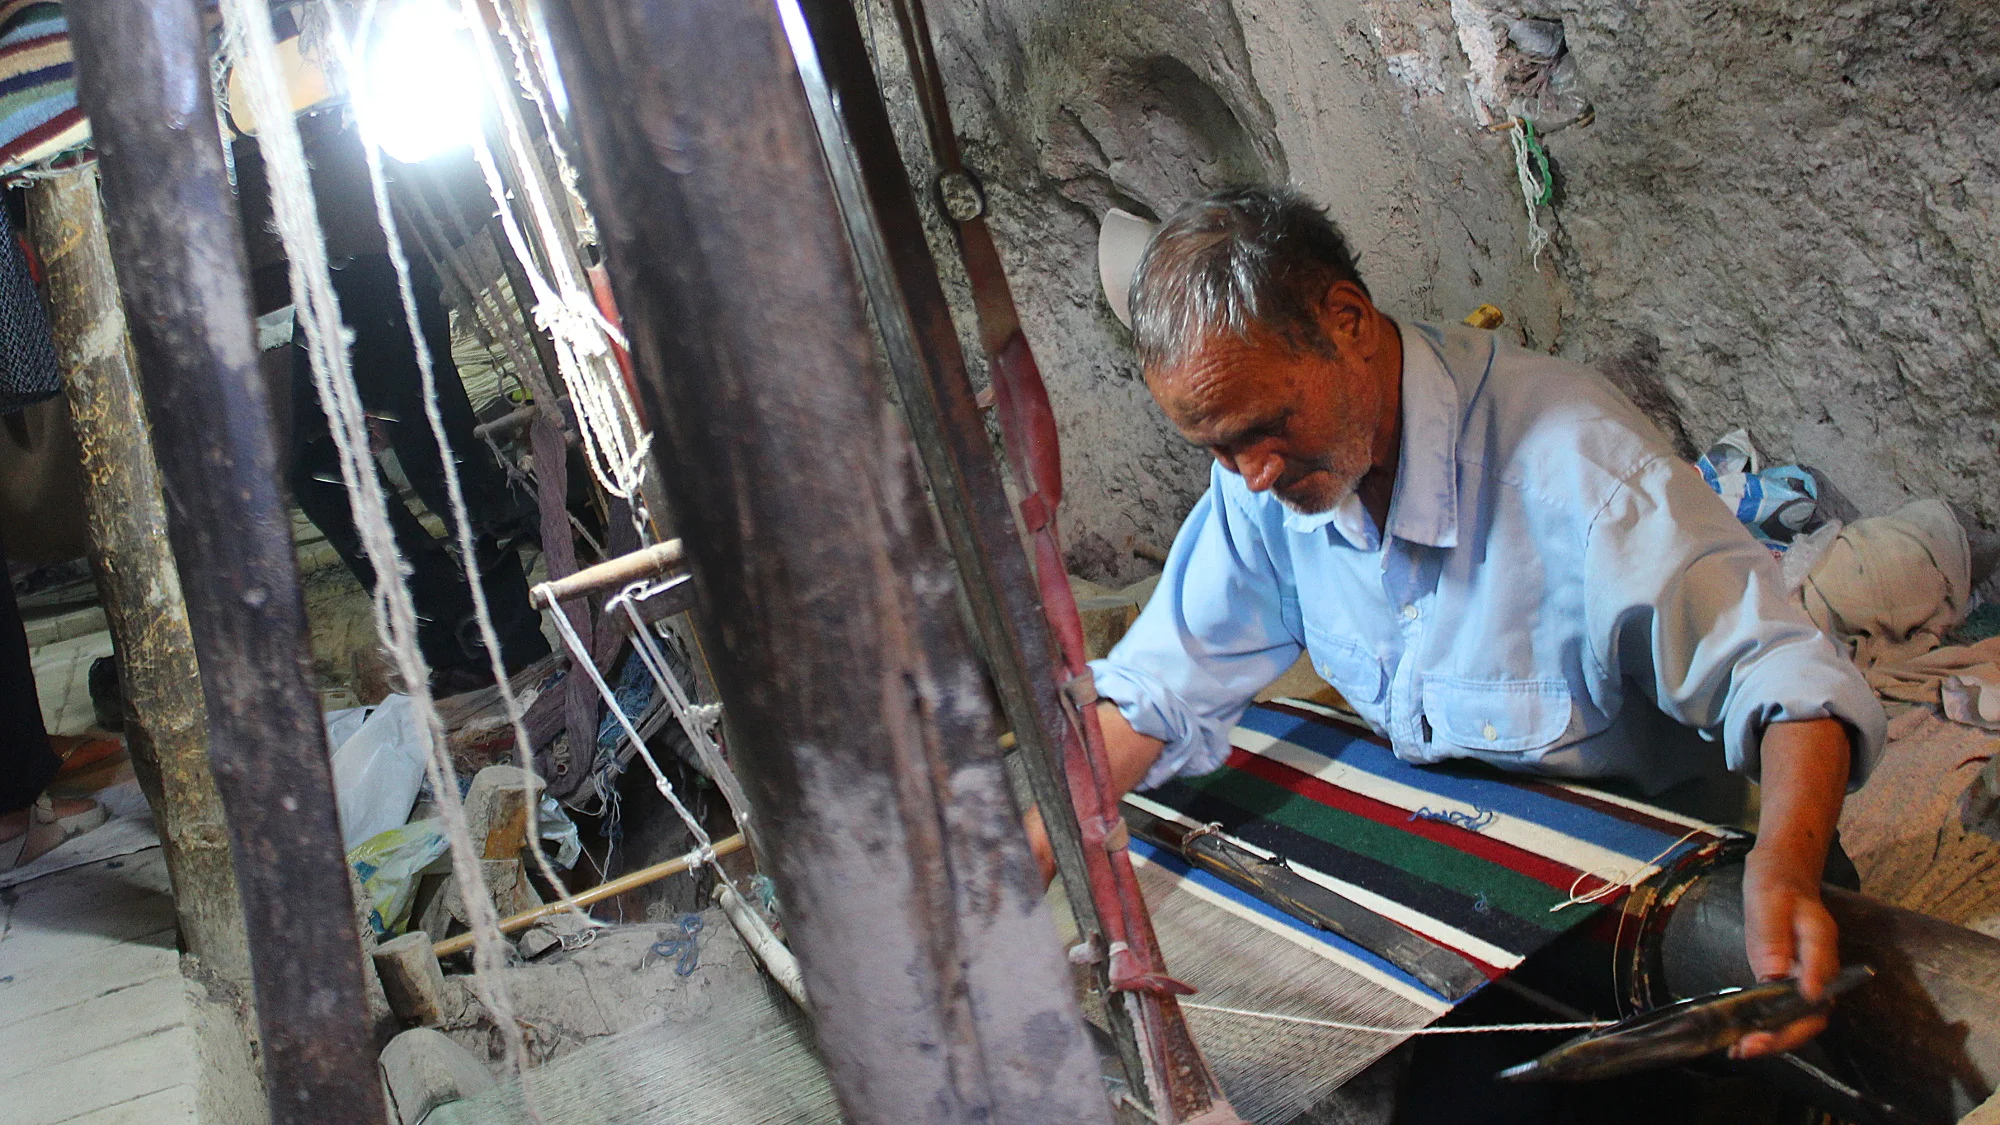 Traditional carpet maker in a cave in Iran.